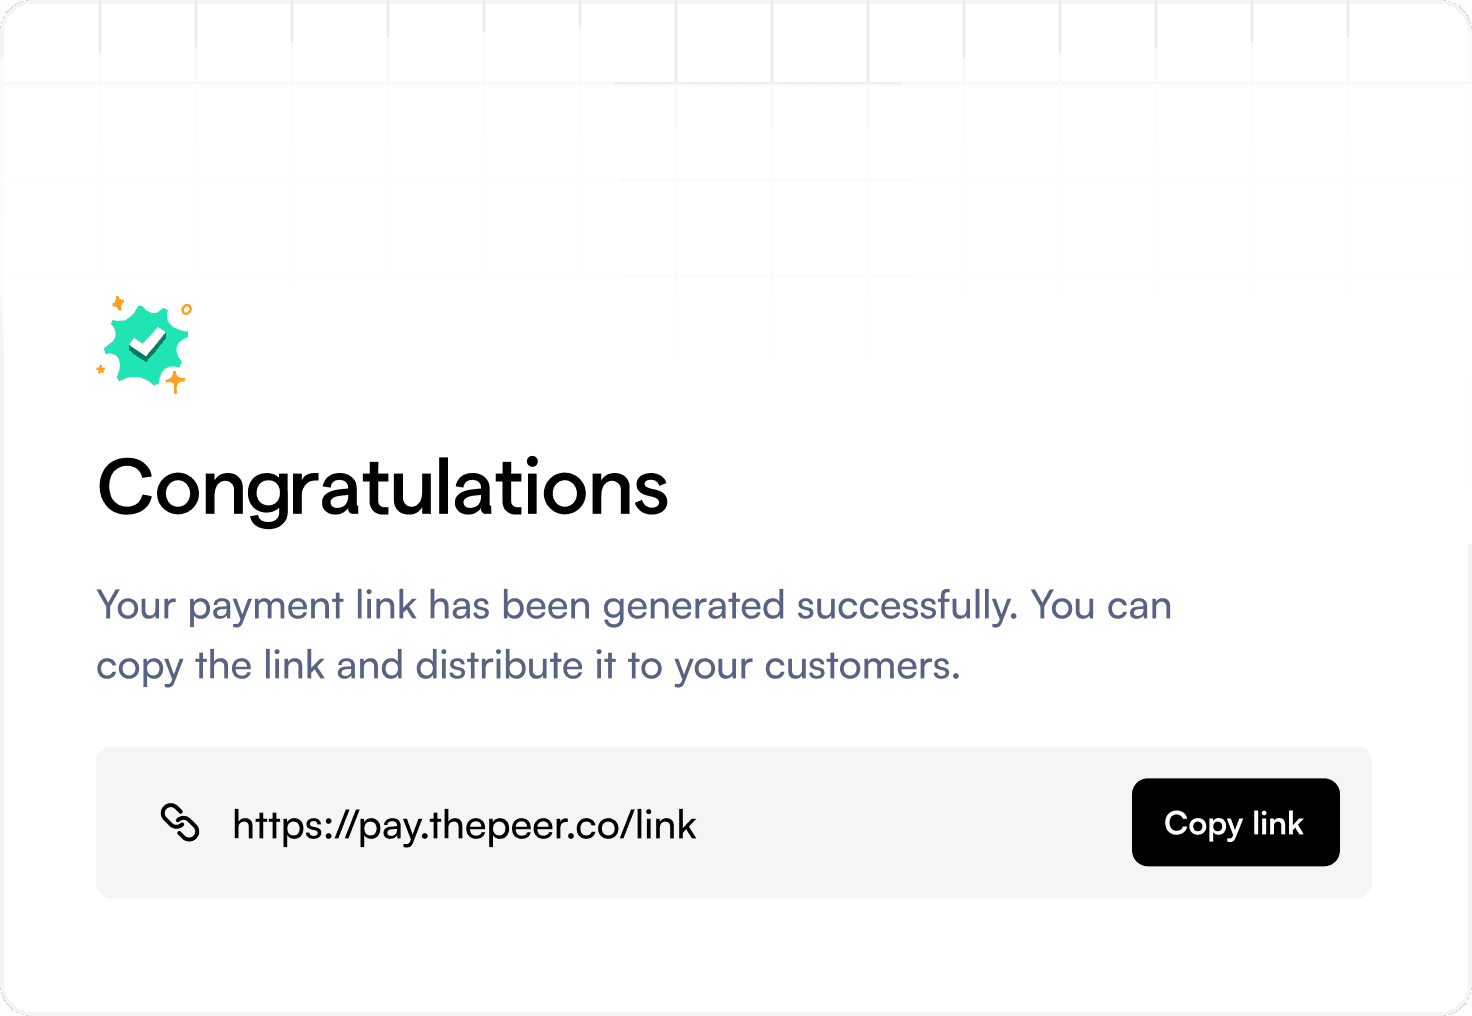 An image of a success screen after creating a payment link